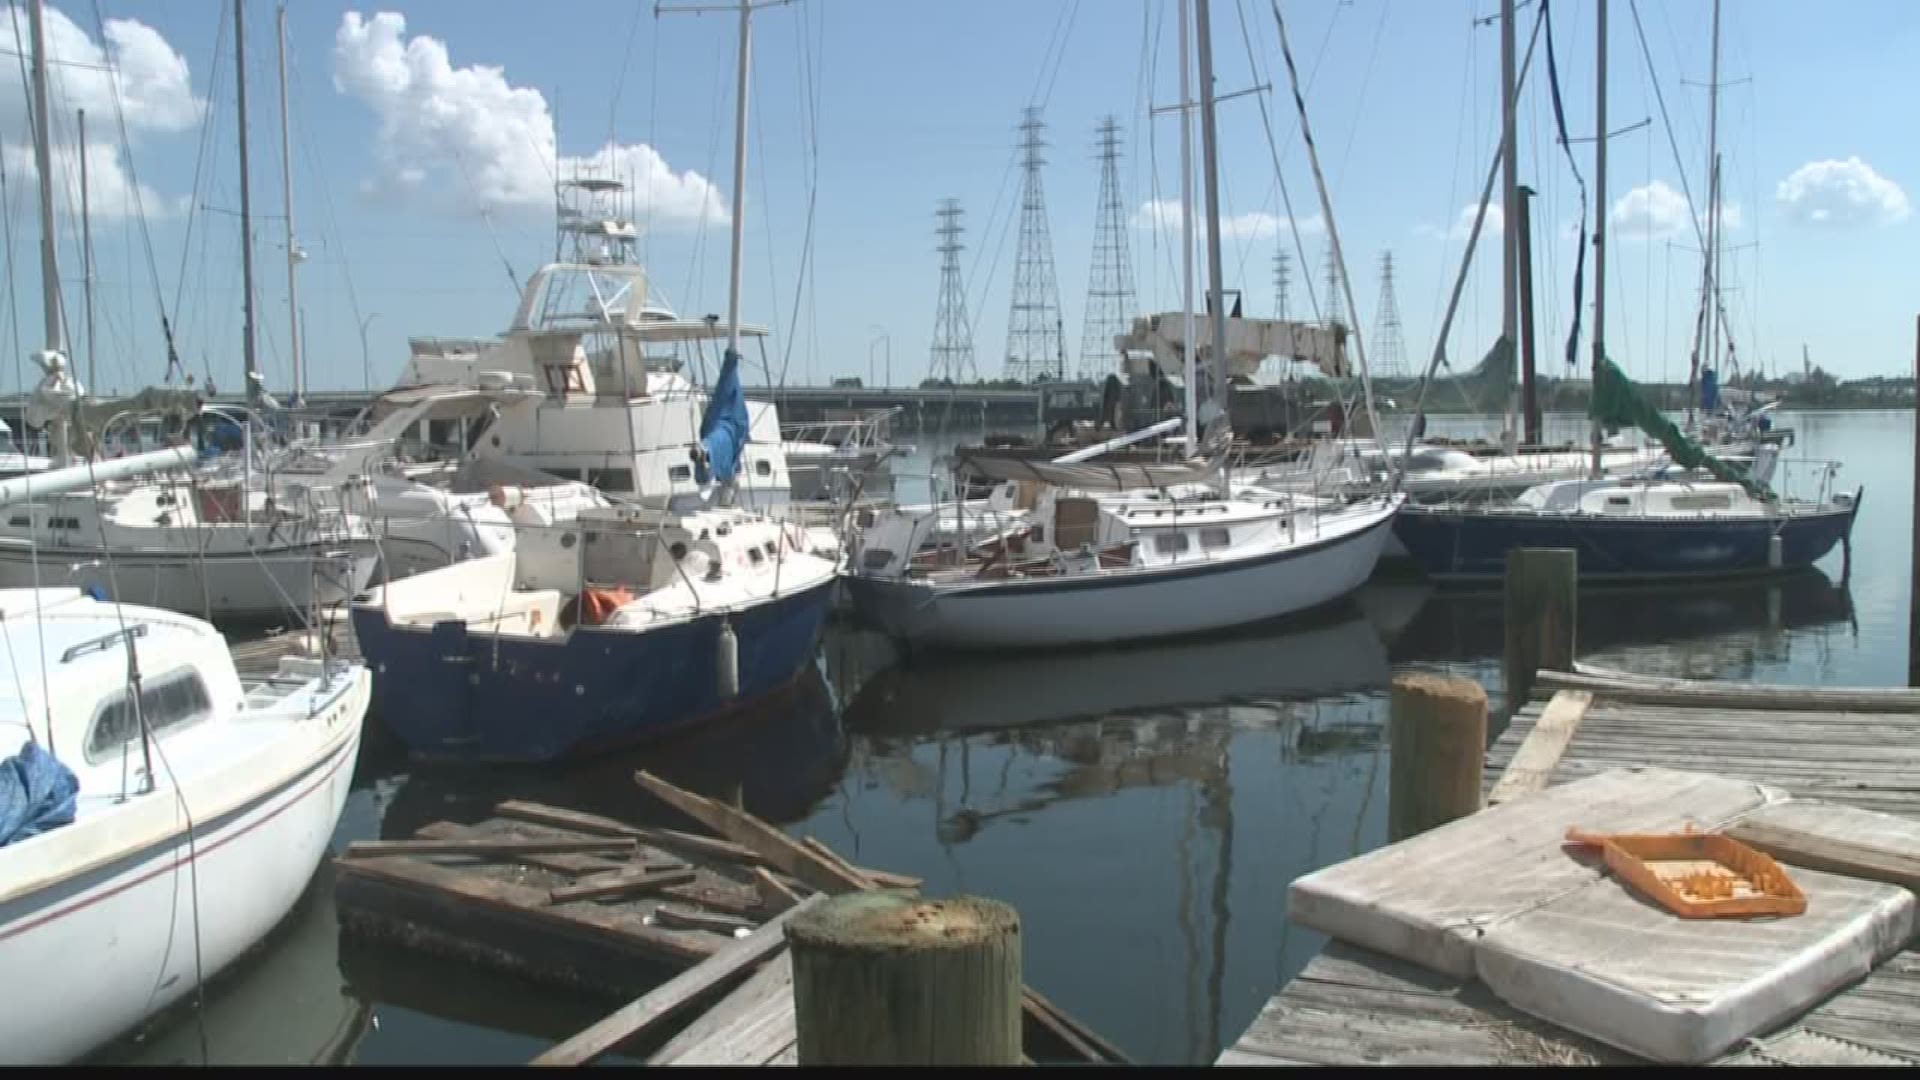 The Safe Harbor Maritime Academy in Jacksonville, Fla. was damaged during Hurricane Irma. Now they are attempting to rebuild. Ken Amaro reports. 9/28/17